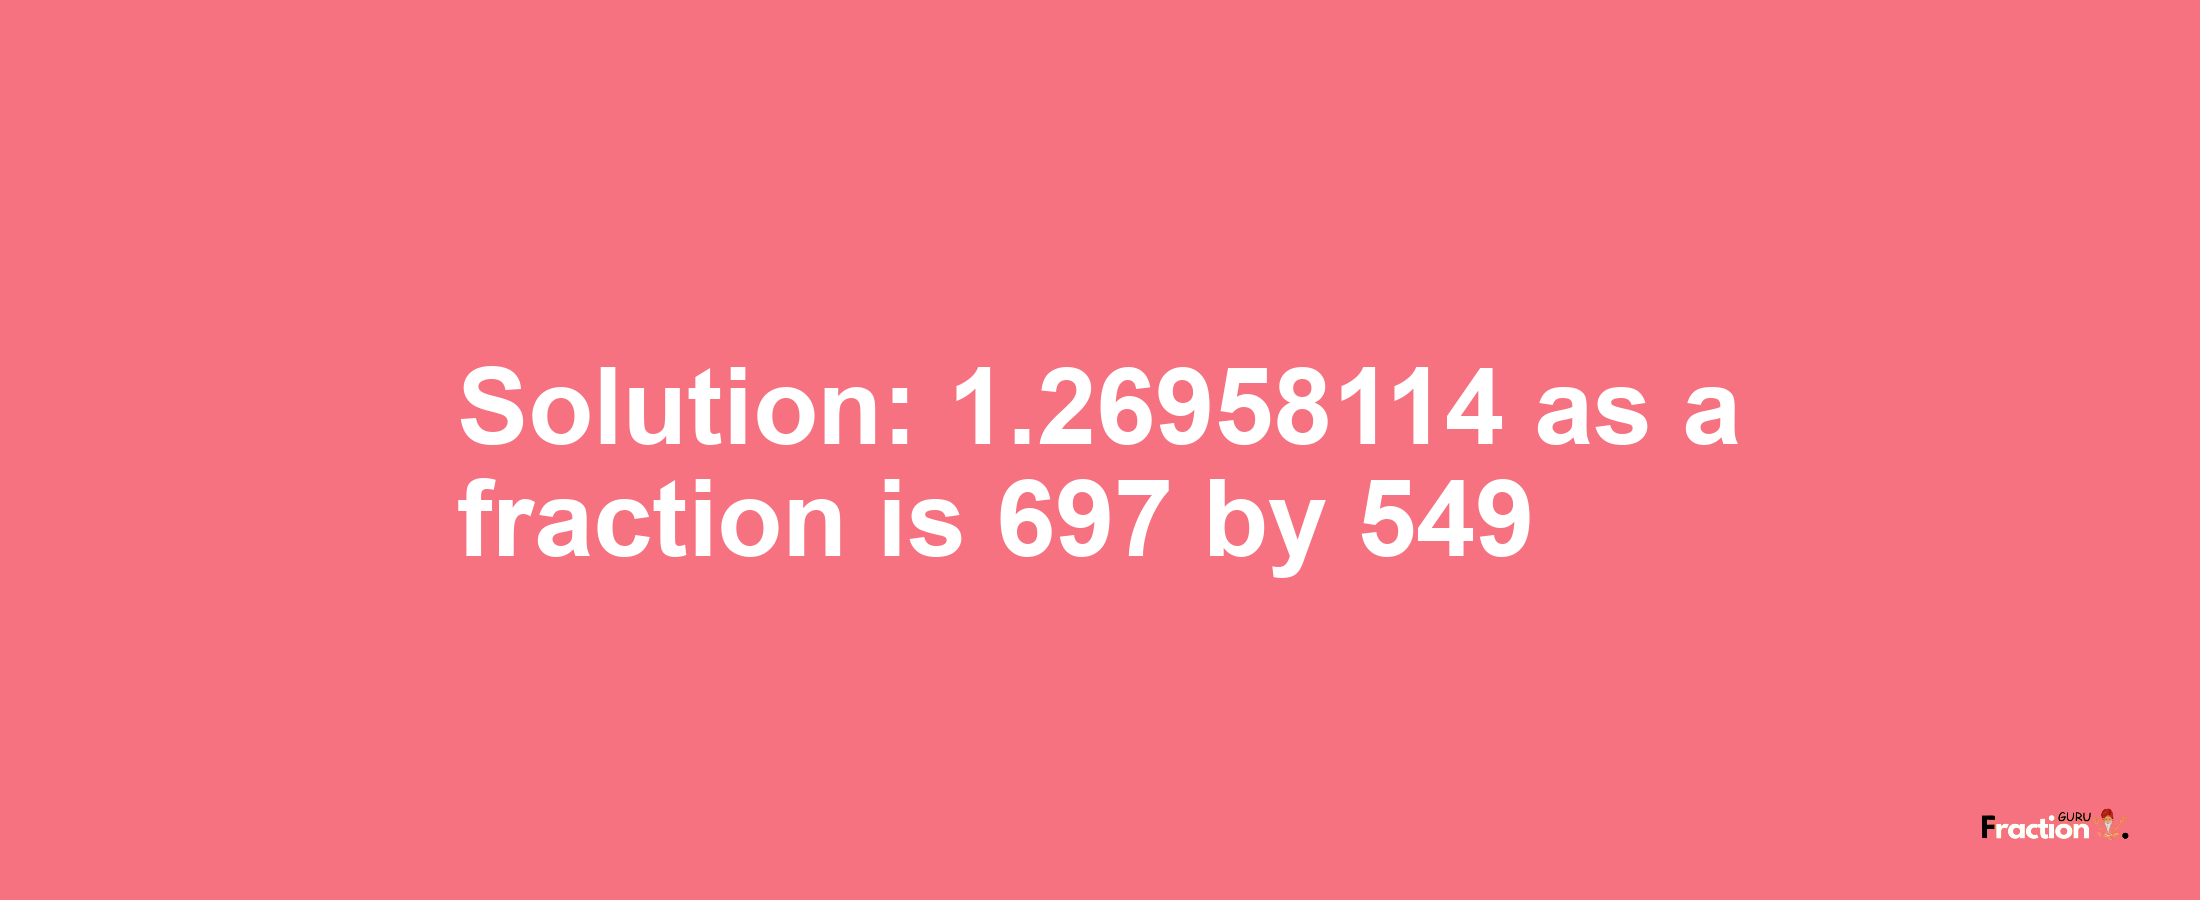 Solution:1.26958114 as a fraction is 697/549